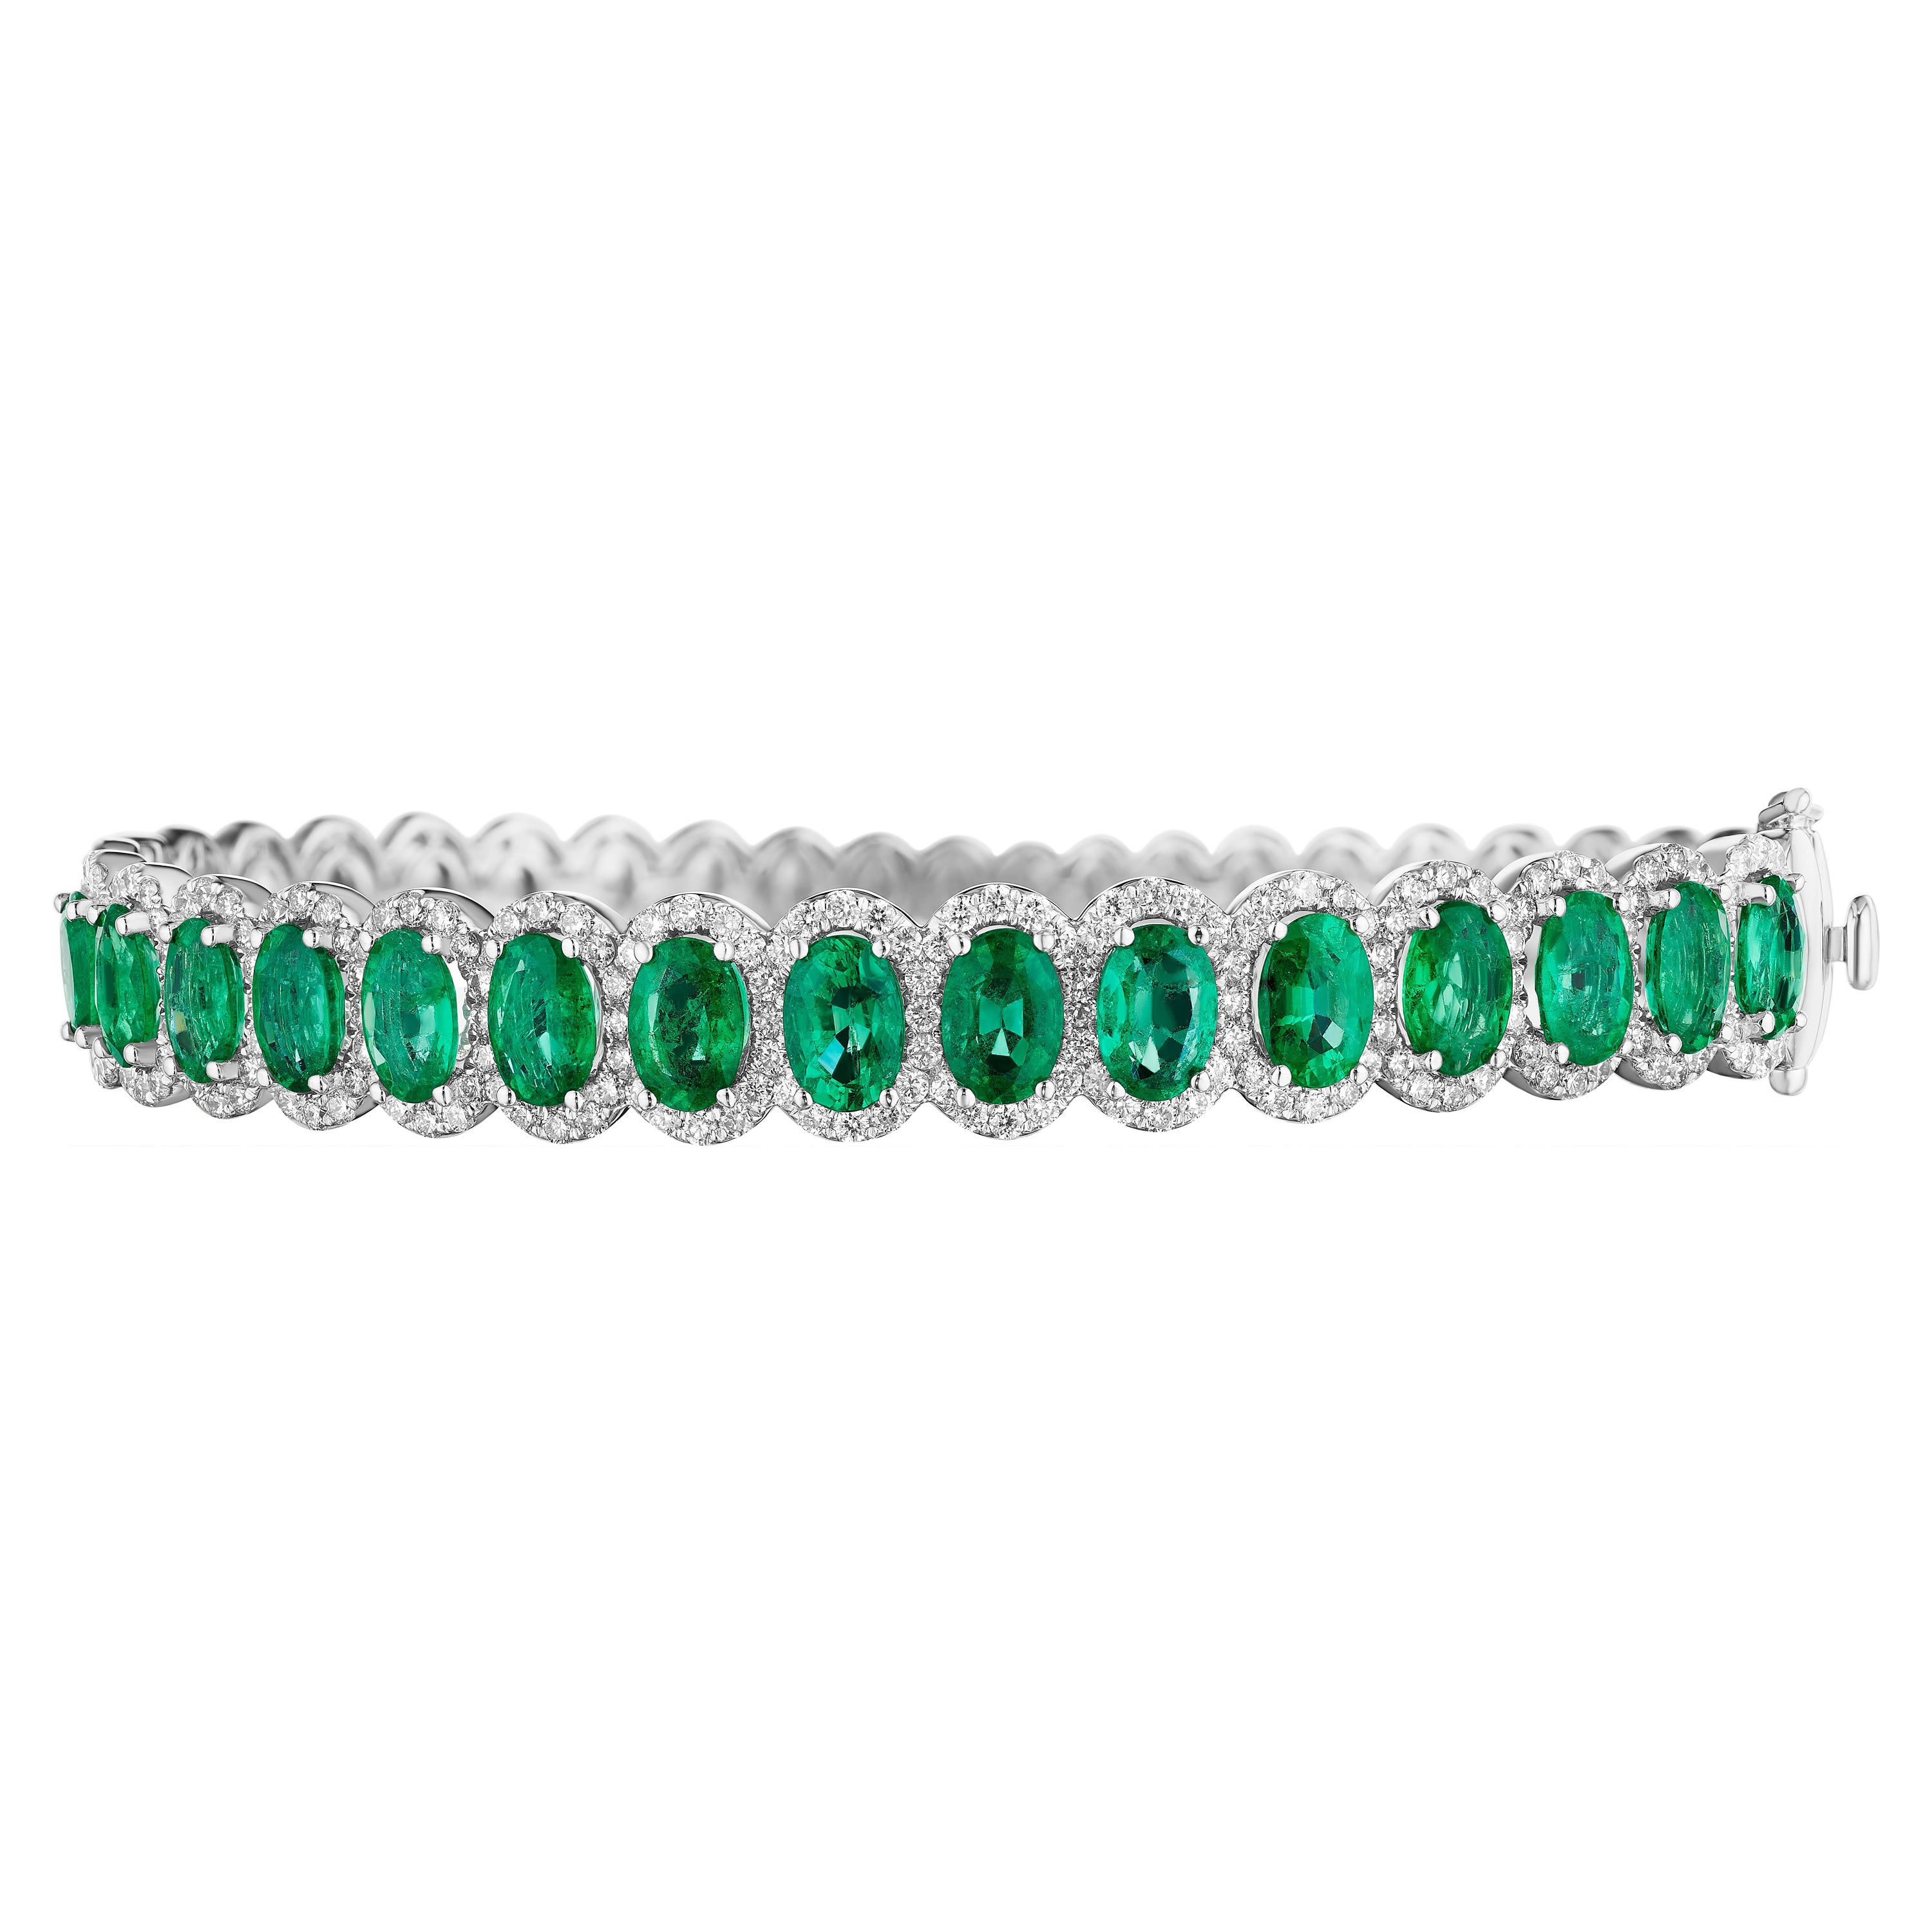 10.35ct Oval Emerald & Diamond Bangle in 14KT Gold